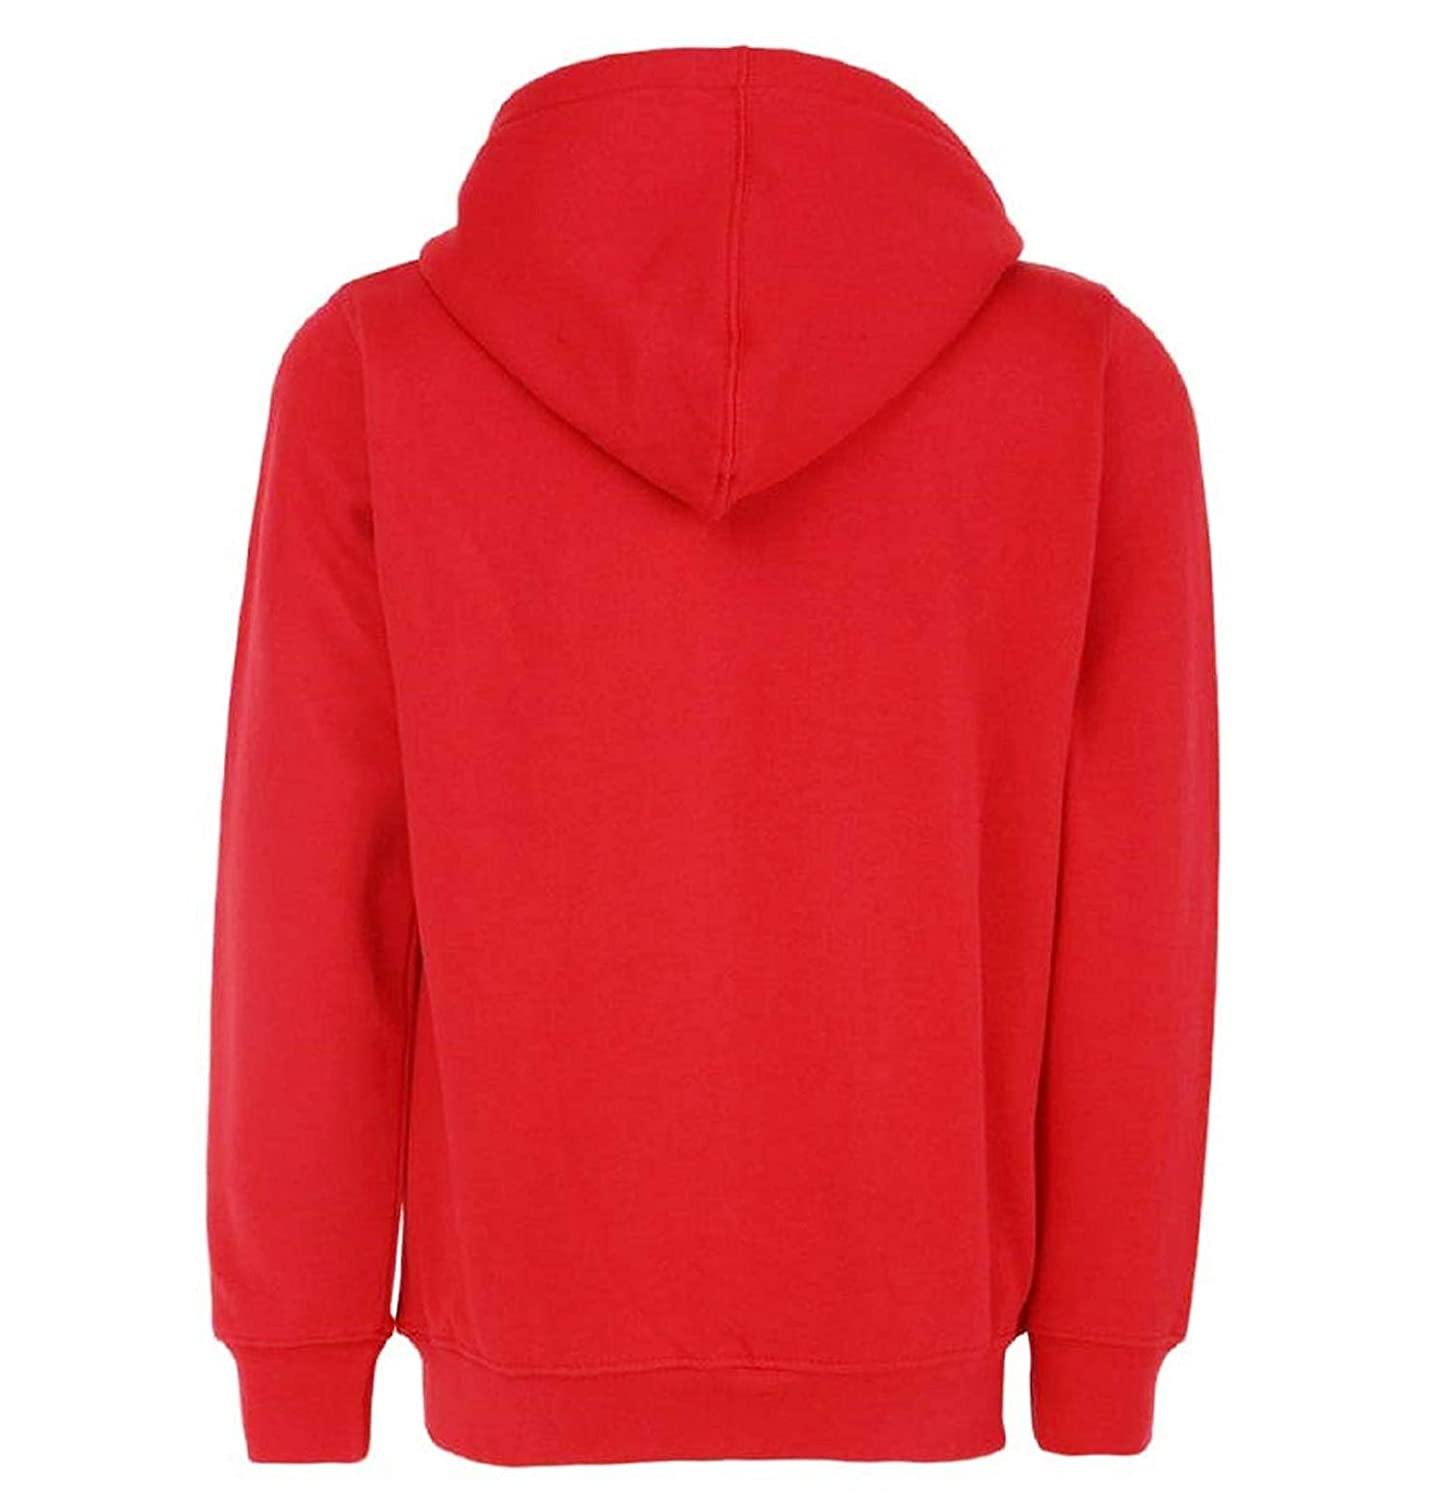 Prokick Kid's Rich Cotton Full Sleeves Zipper Jacket with Hoodies for Girls and Boys Red - Best Price online Prokicksports.com